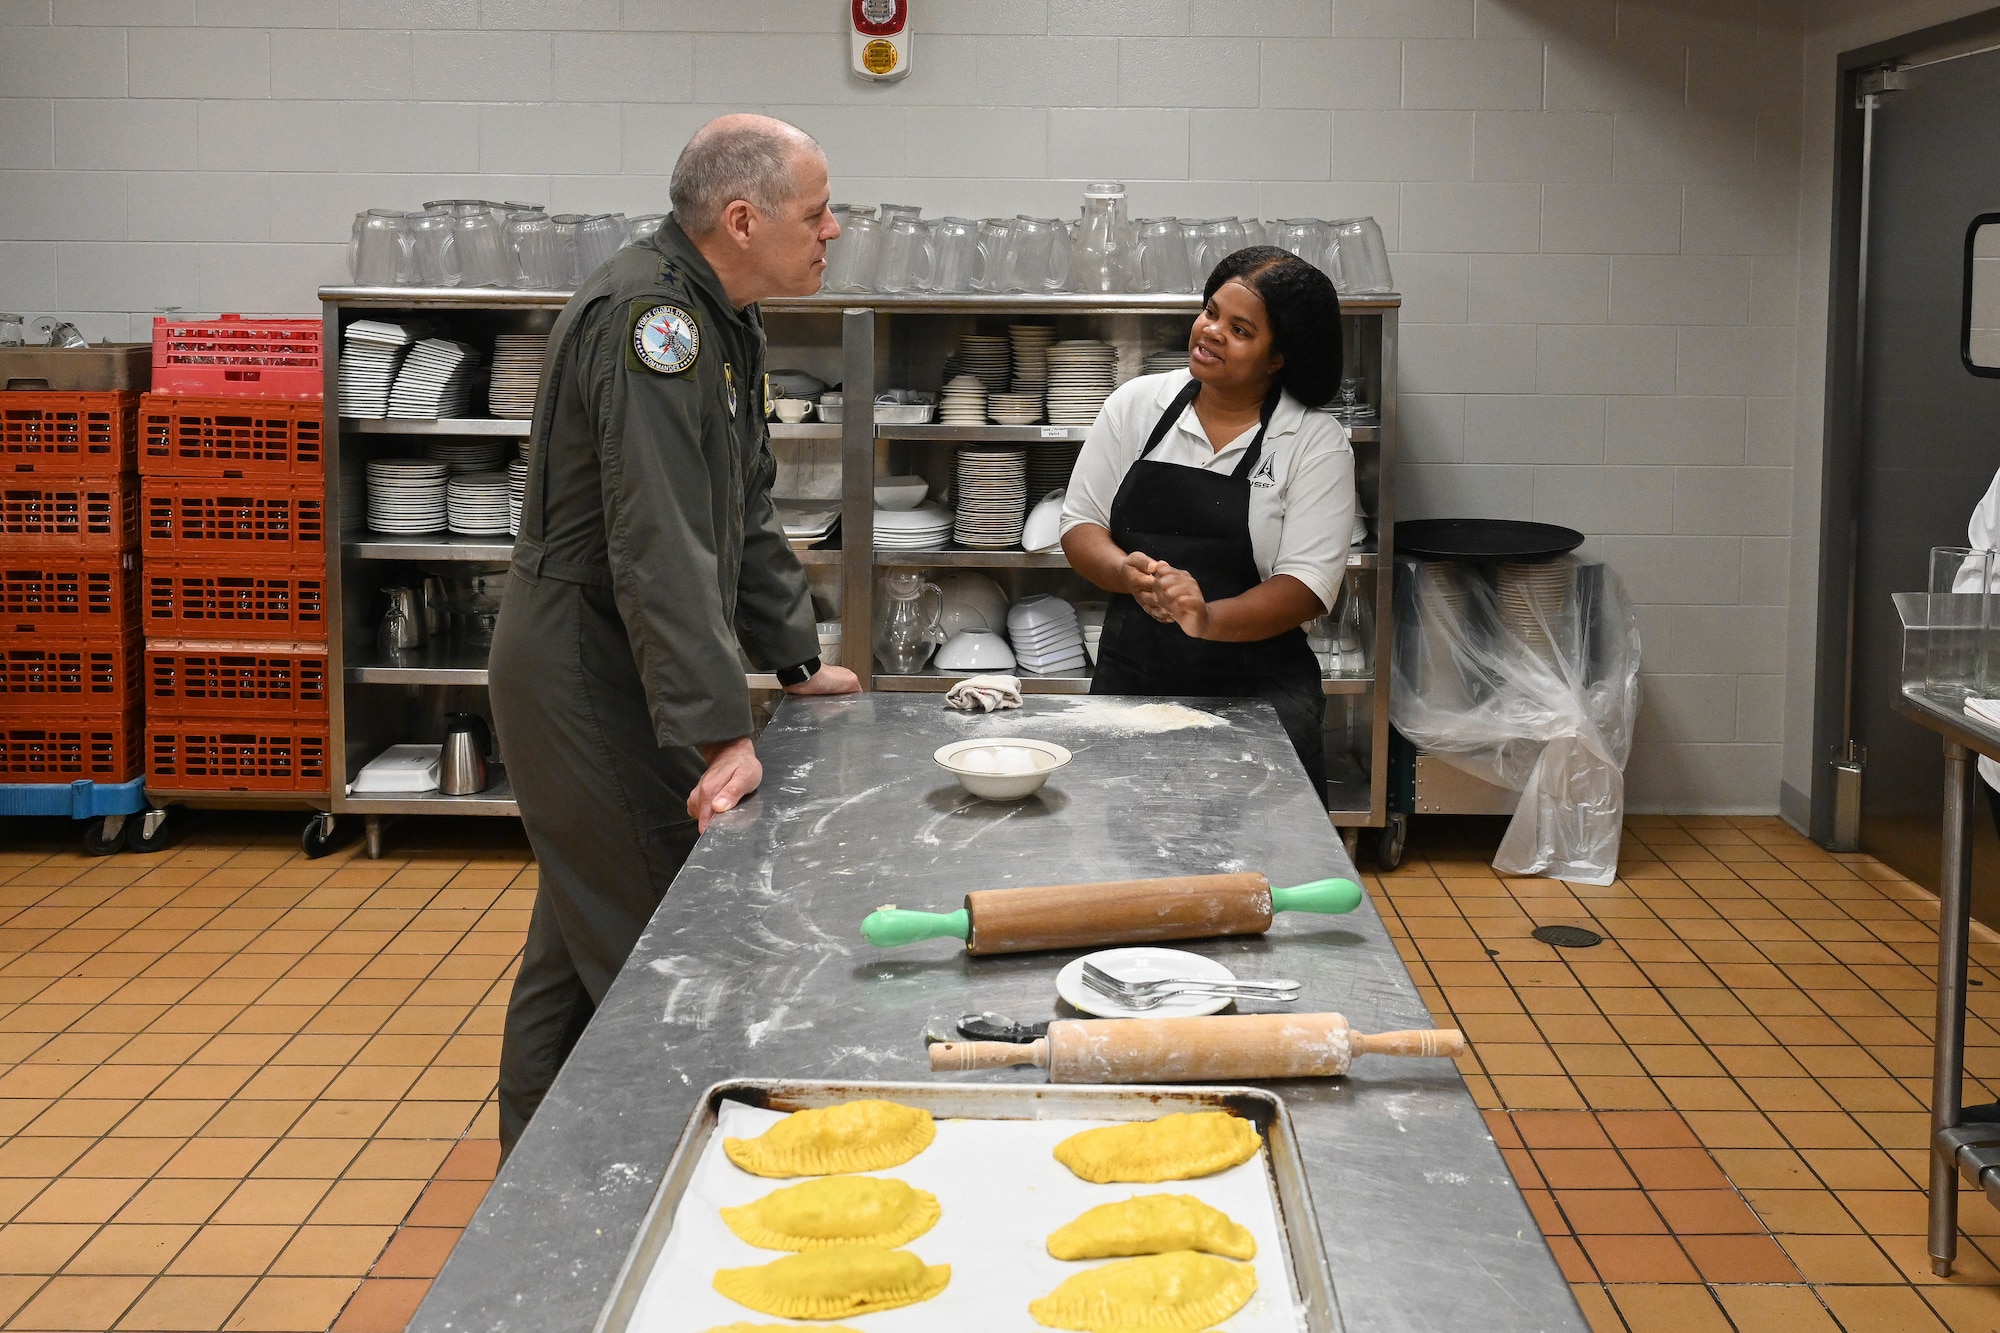 Gen. Tom Bussiere and TSgt. Shameka Risch talk in a kitchen by a table with rolling pins and flour.